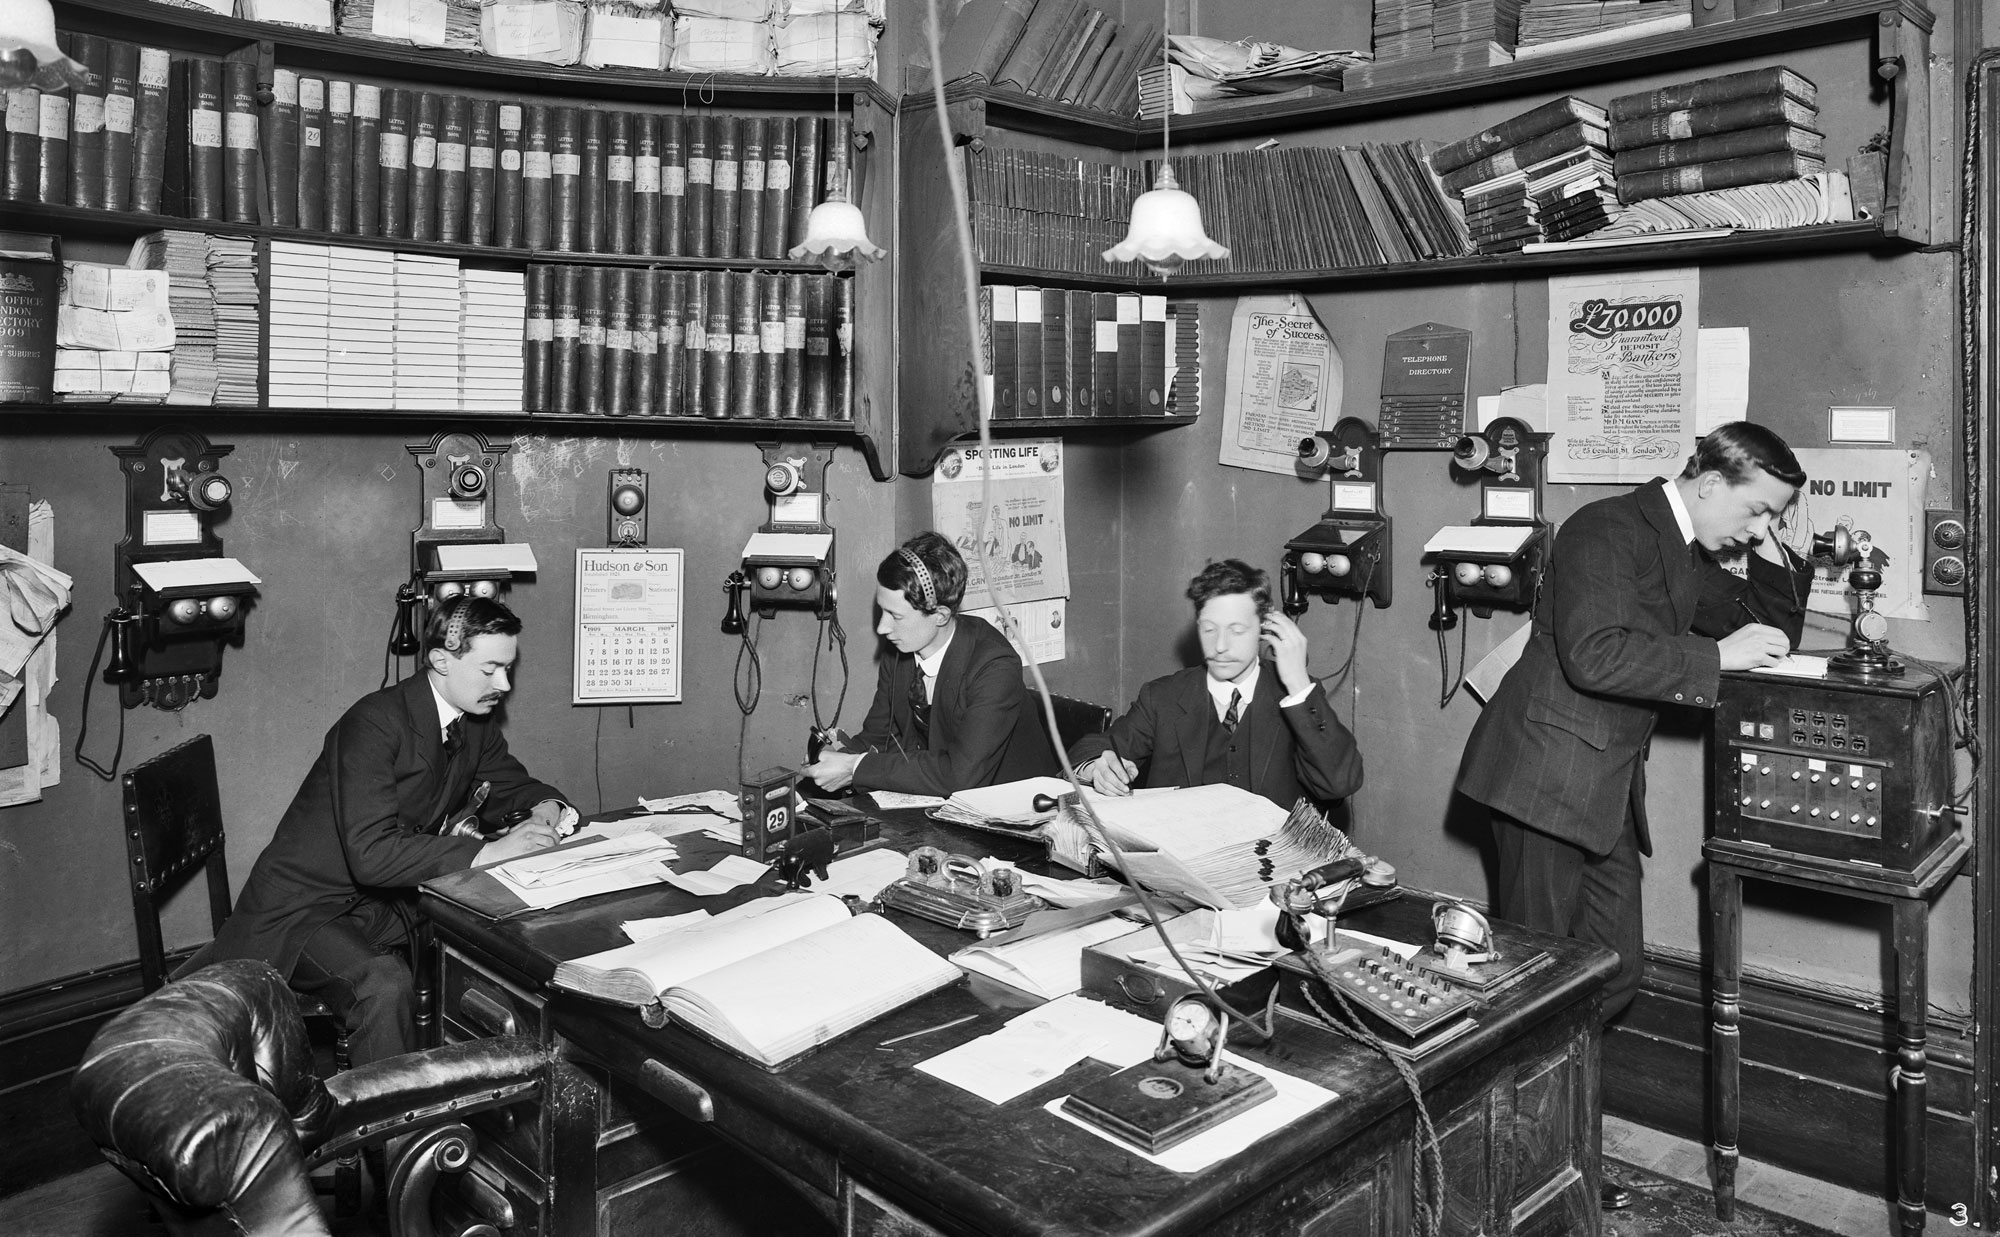 A black and white photo of the interior of a crowded office in 1909.